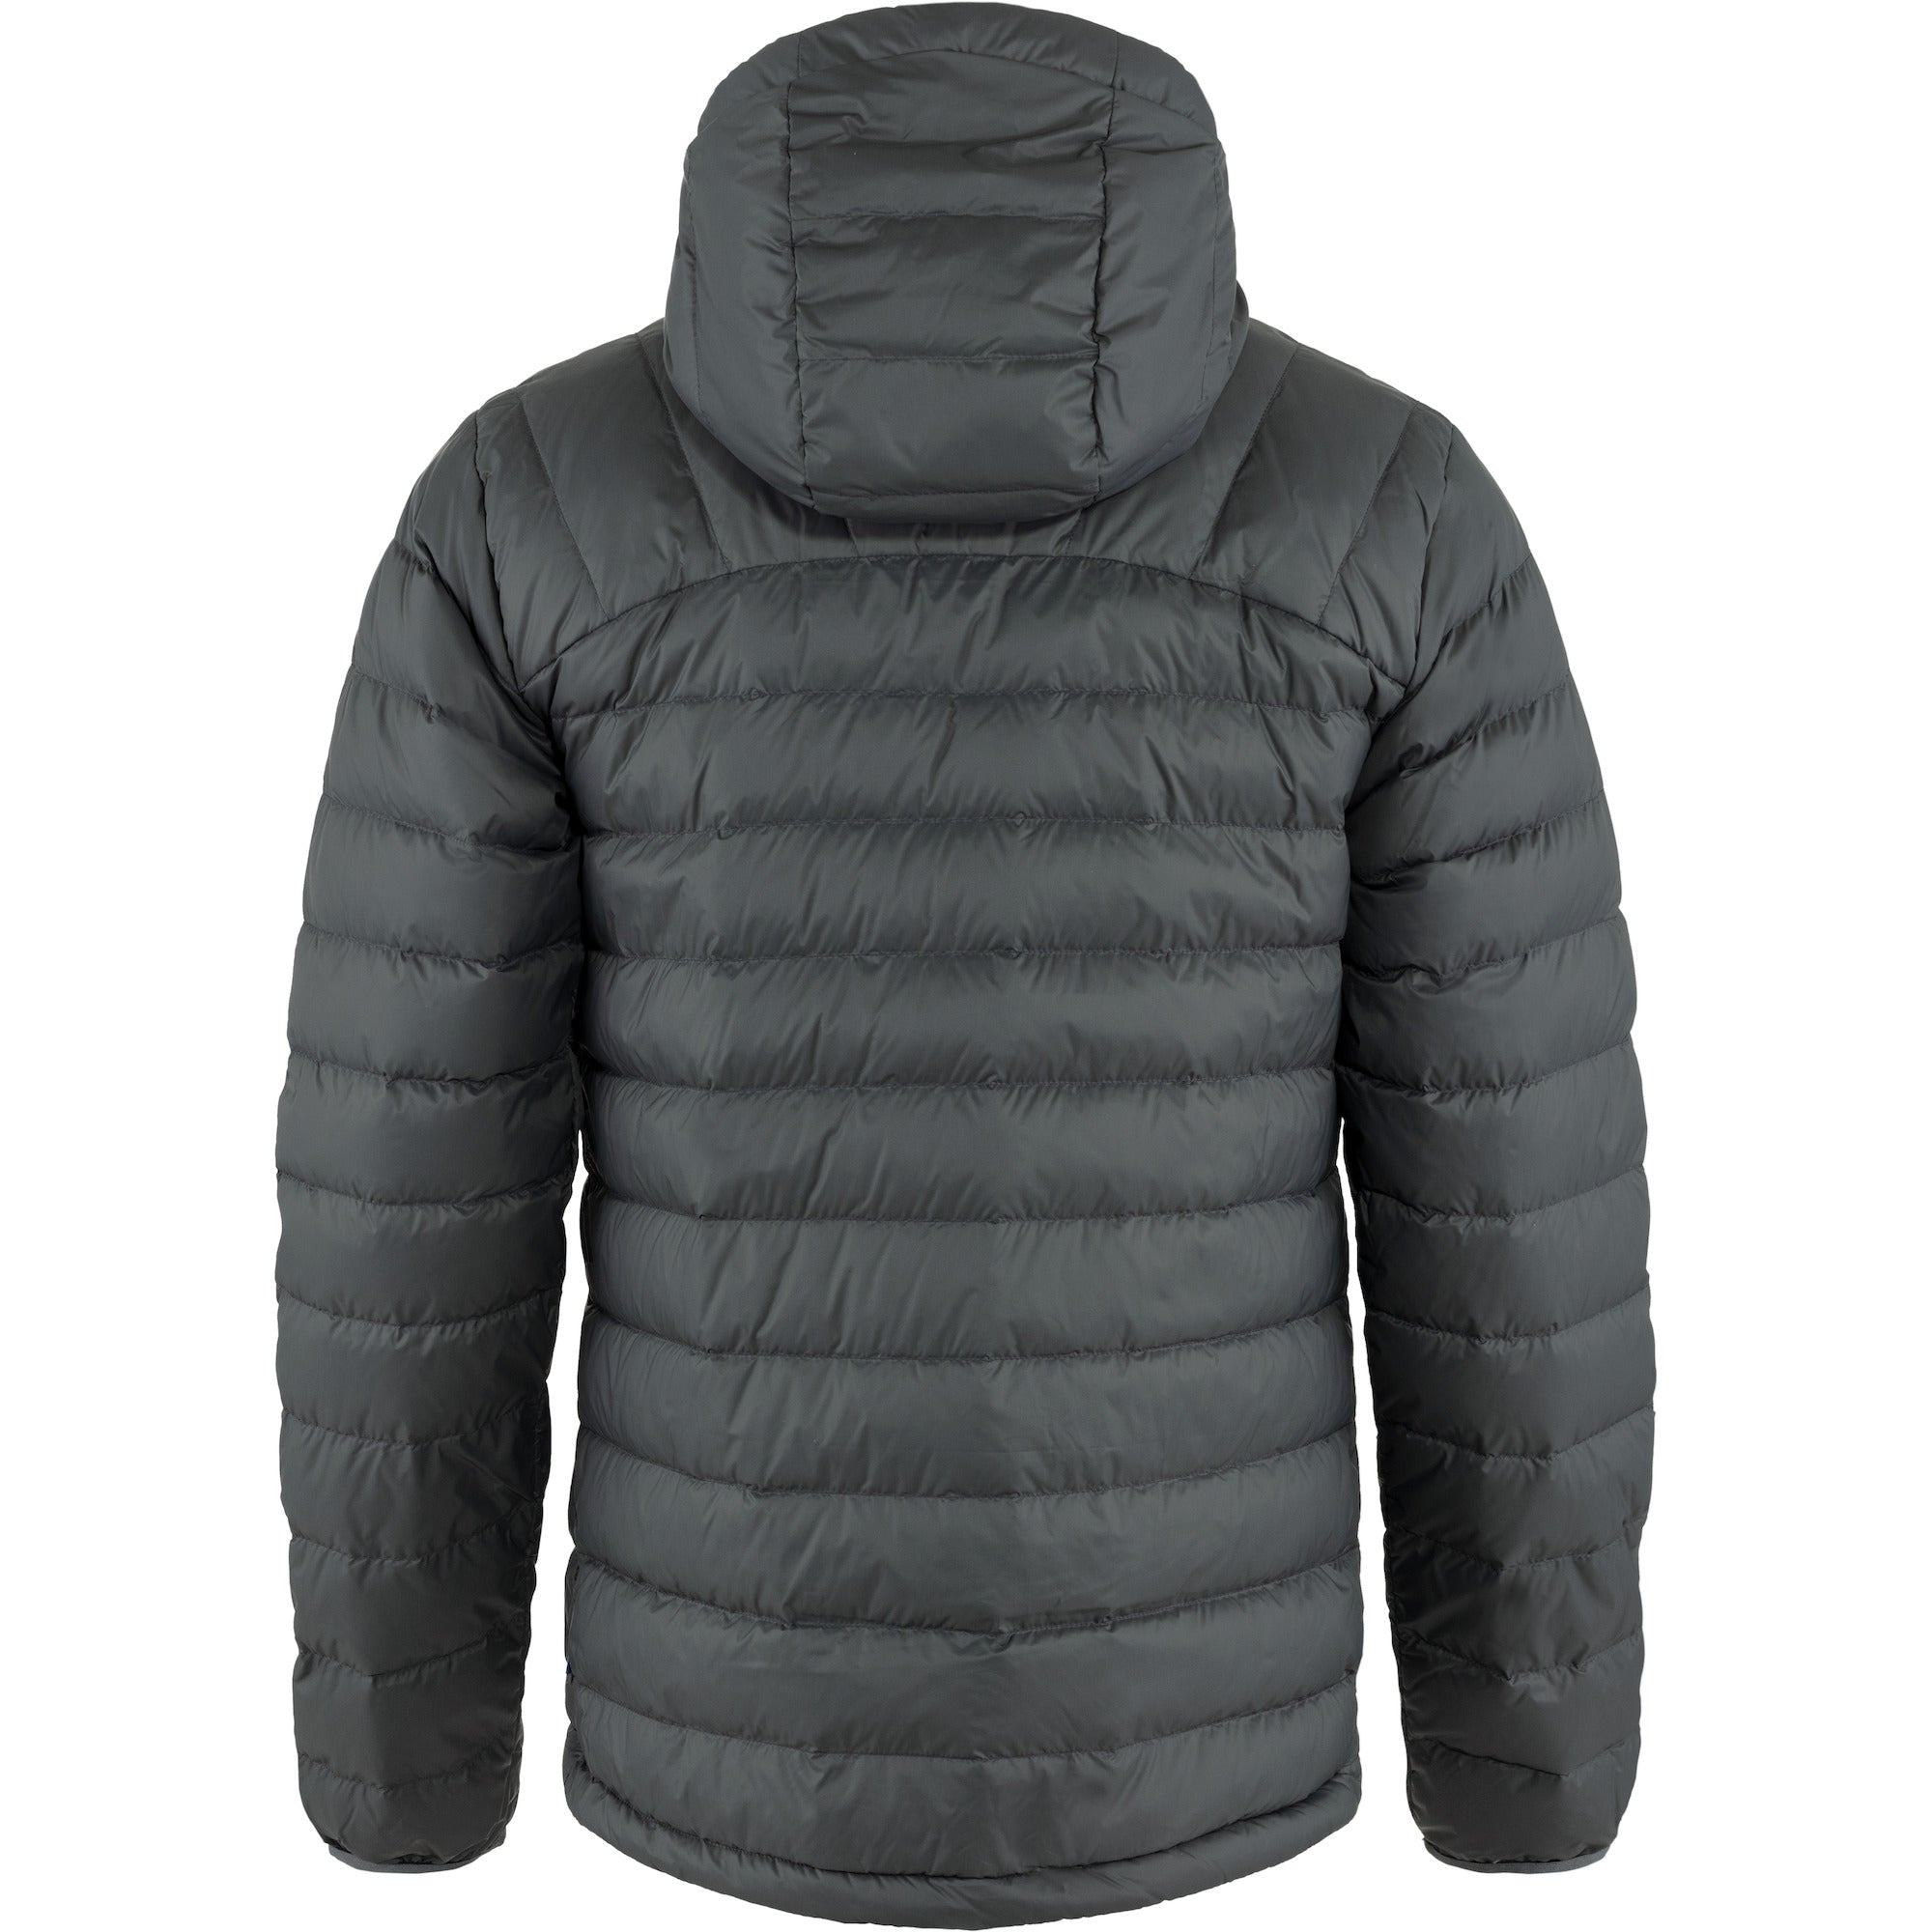 Fjallraven Men's Expedition Pack Down Hoody Jacket